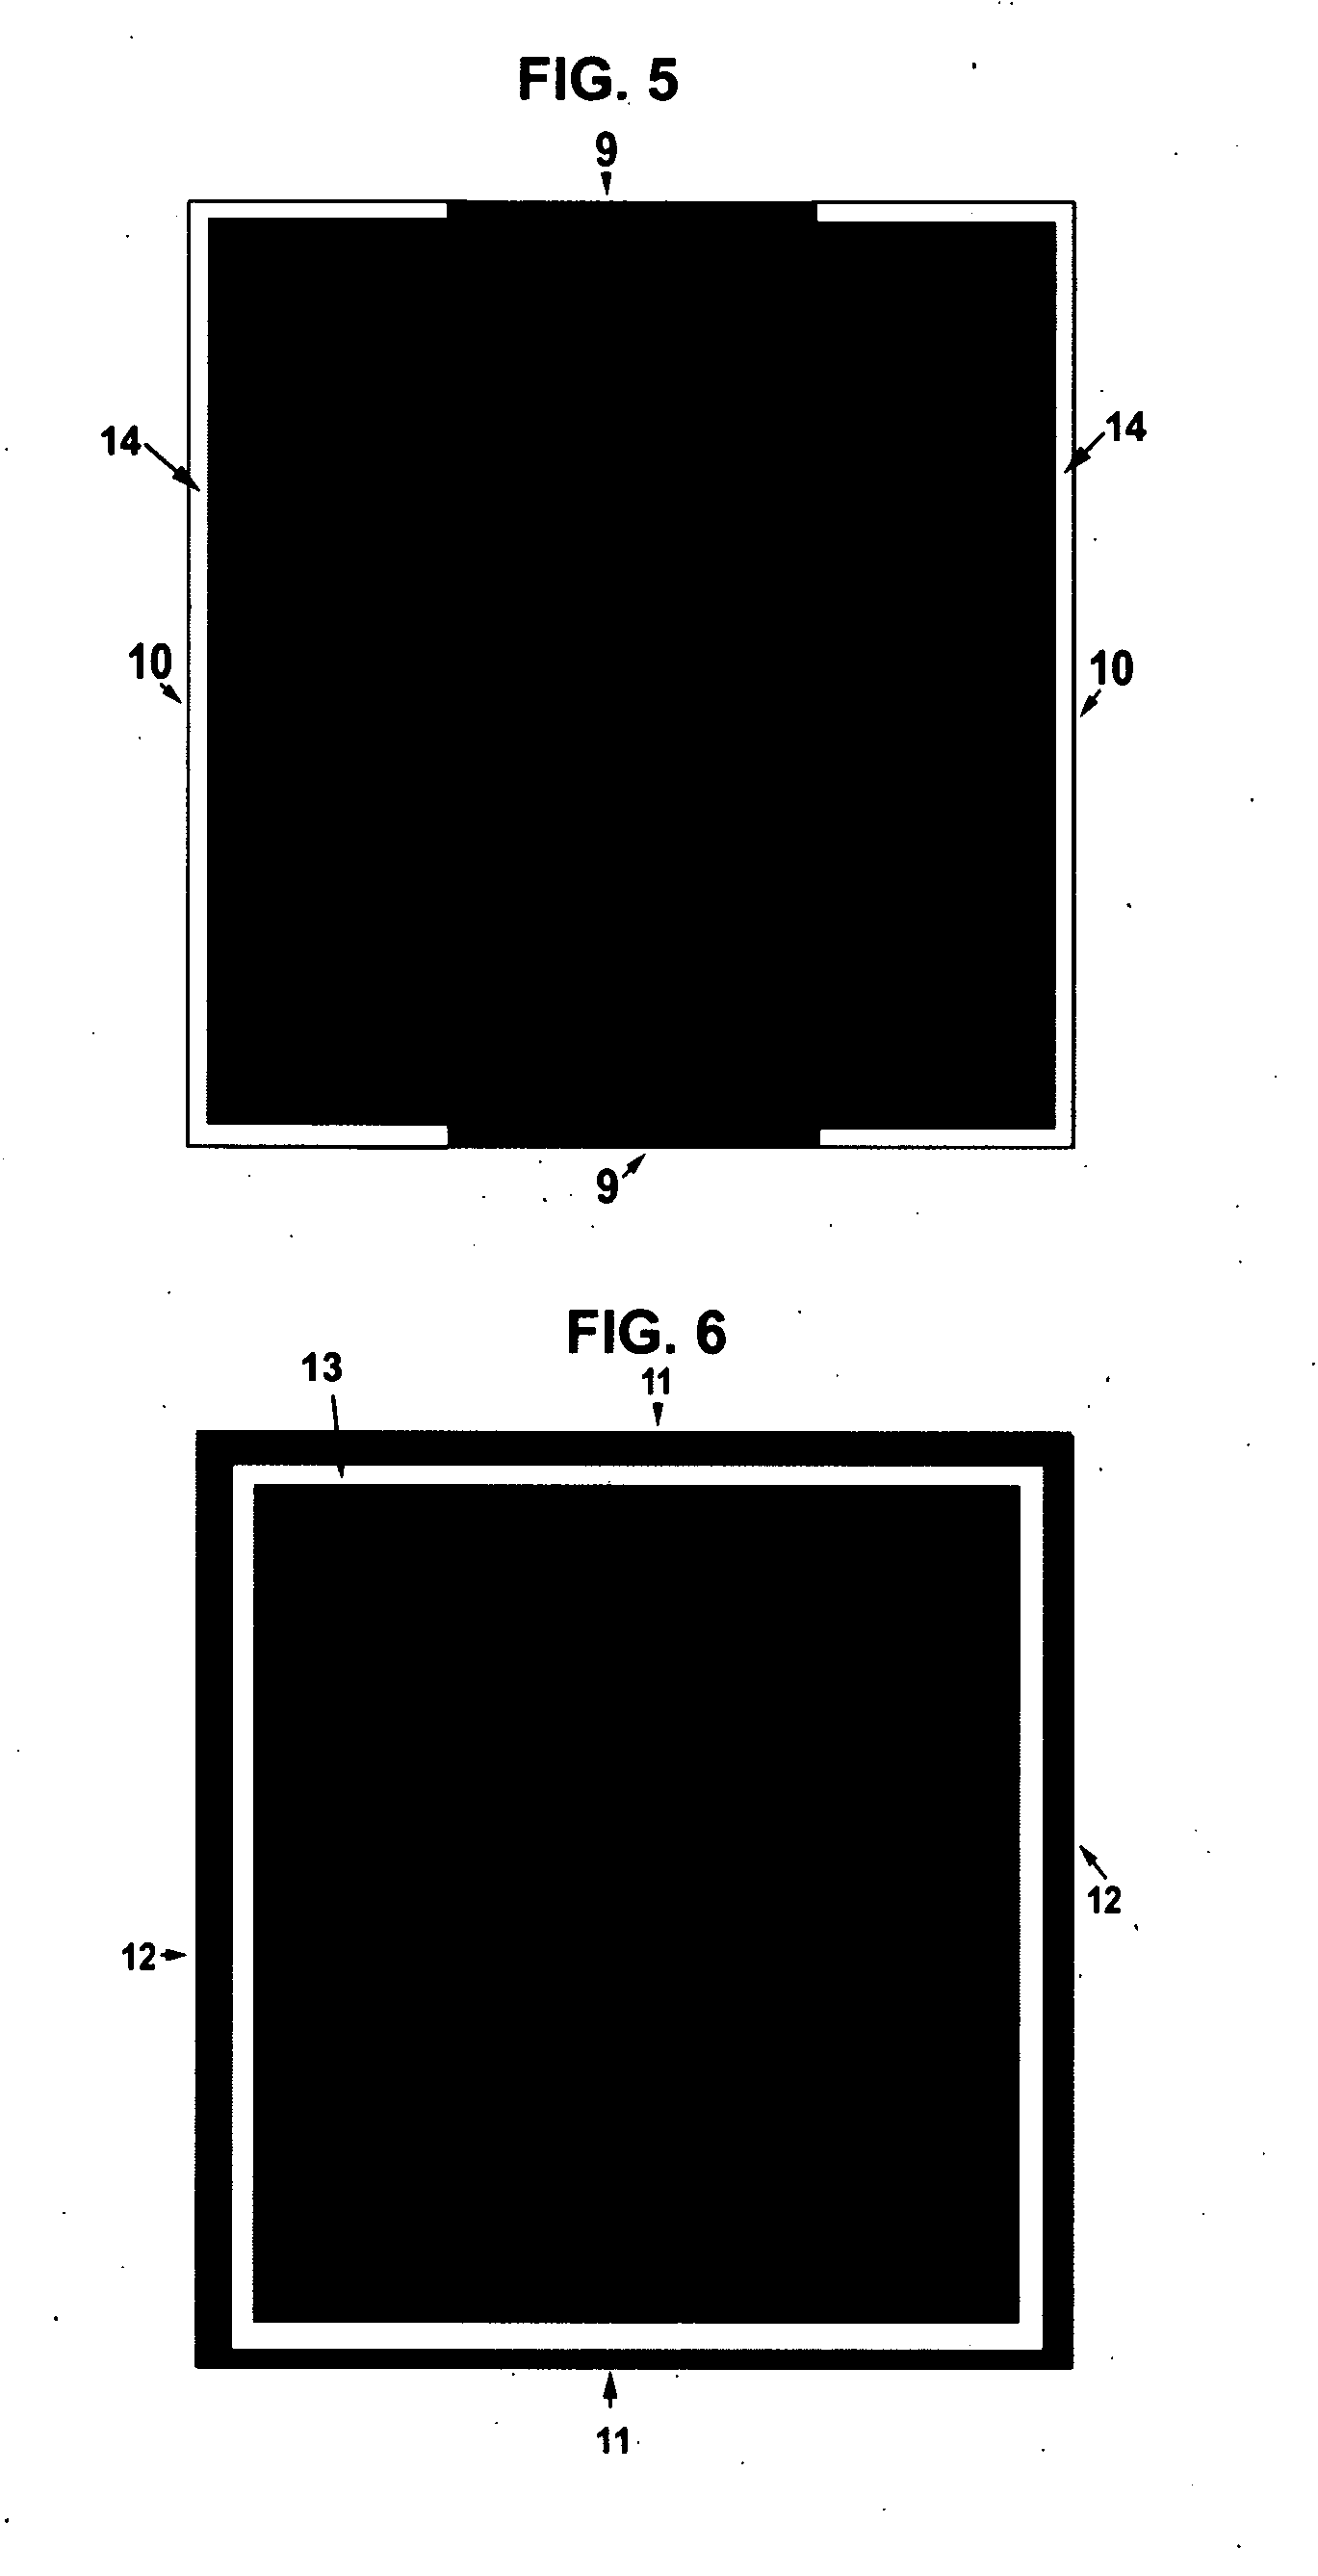 Method and apparatus that increases efficiency and reproducibility in immunohistochemistry and immunocytochemistry